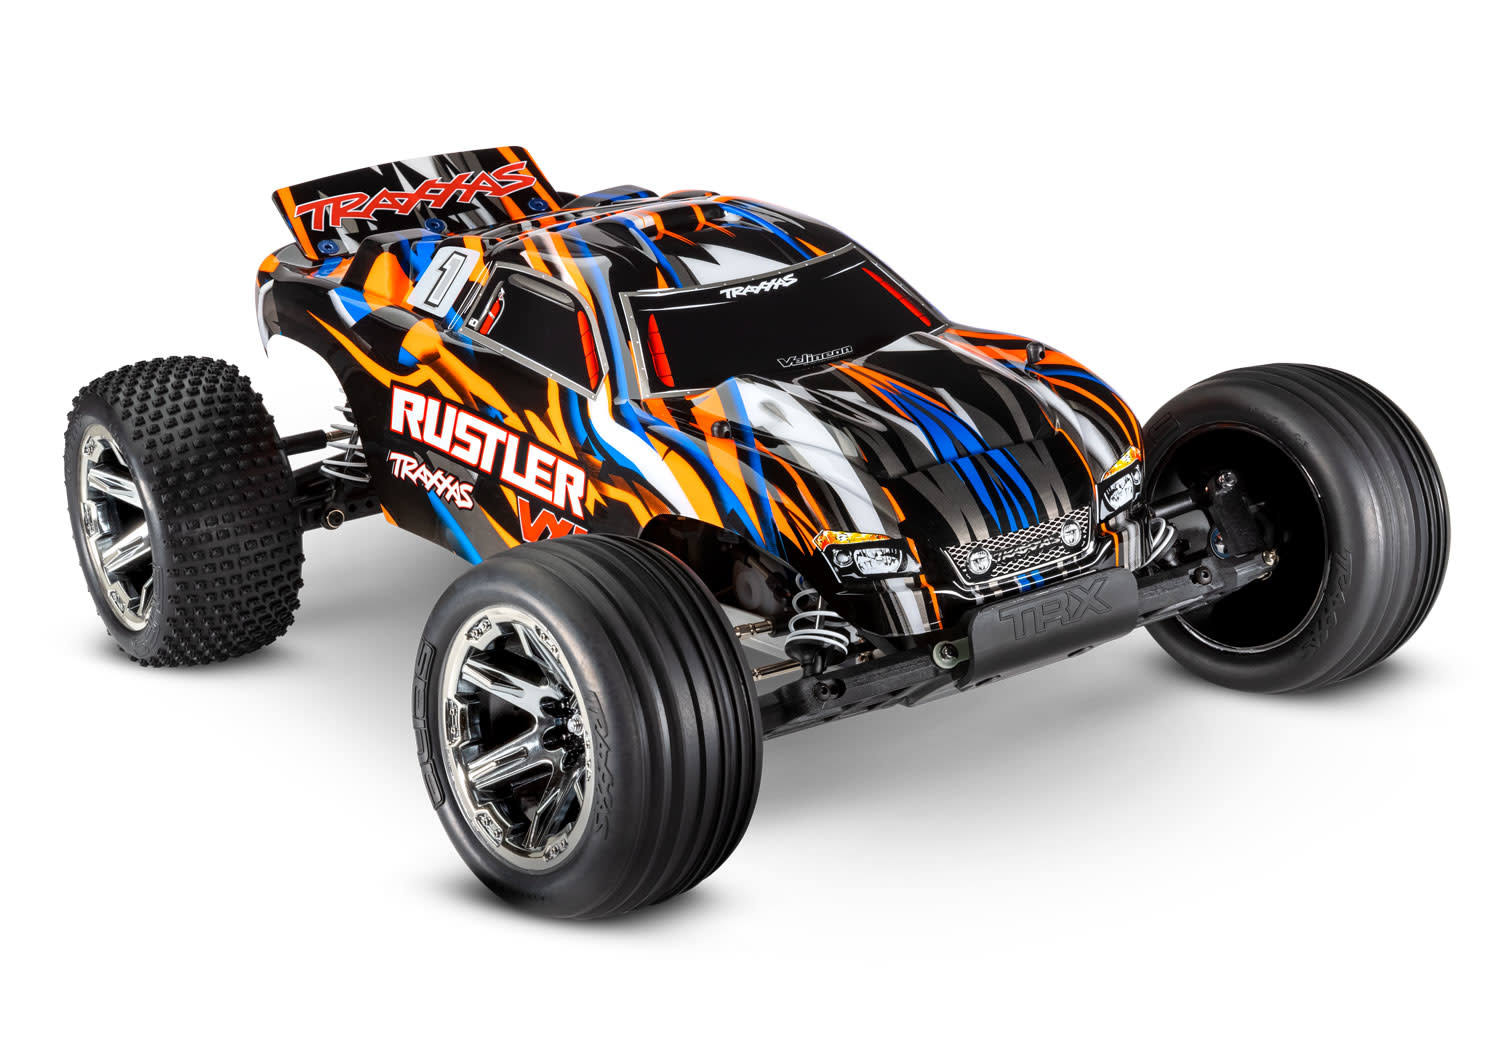 TRAXXAS TRA 37076-74-ORNG Rustler VXL: 1/10 Scale Stadium Truck. Ready-to-Race with TQi Traxxas Link Enabled 2.4GHz Radio System, Velineon VXL-3s